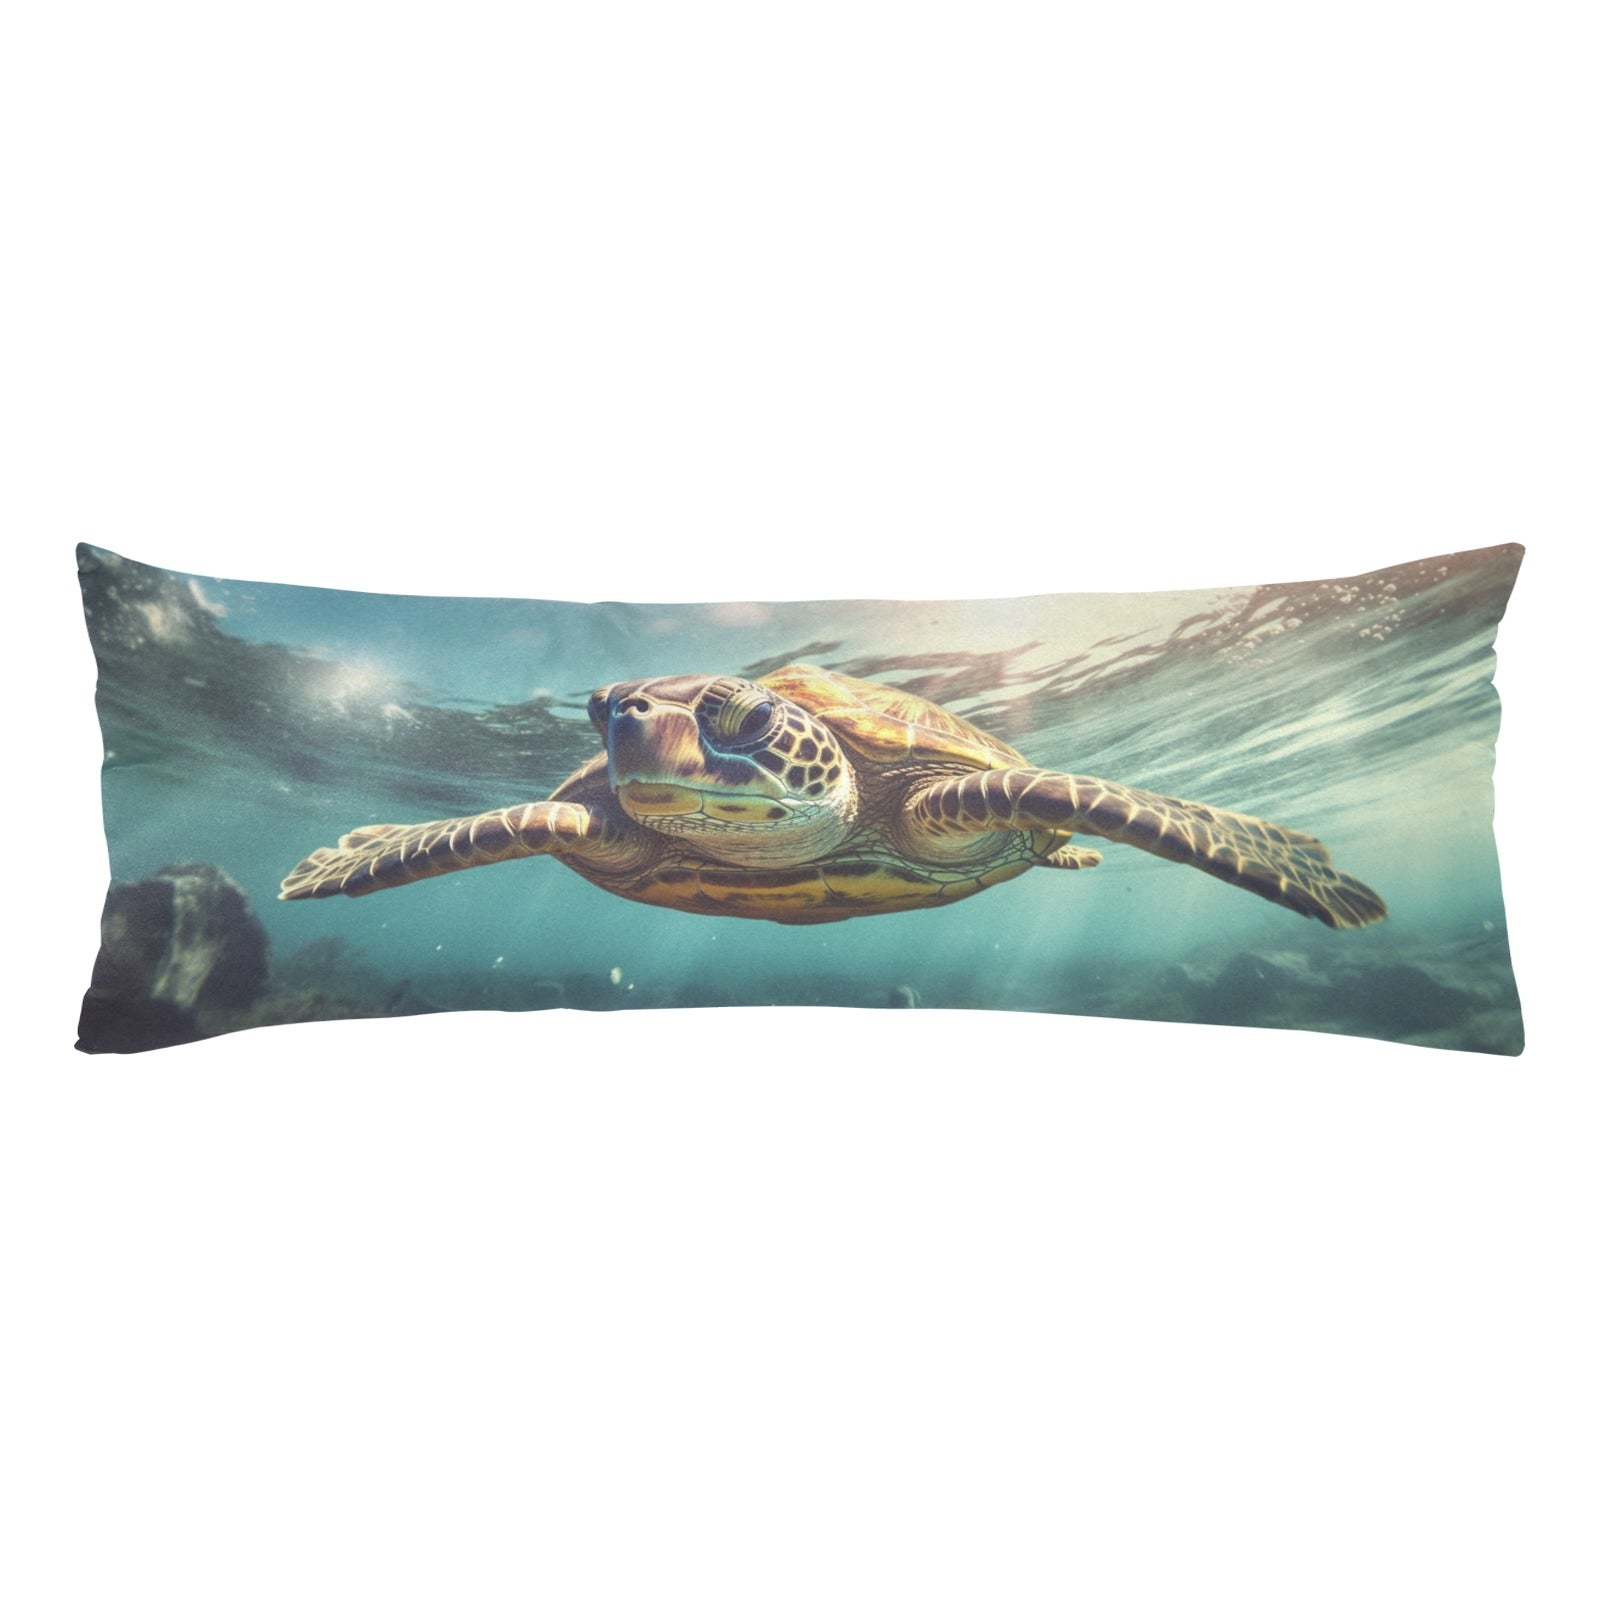 Sea Turtle Body Pillow Case, Ocean Underwater Long Full Large Bed Accent Print Throw Decor Decorative Cover 20x54 Satin Starcove Fashion